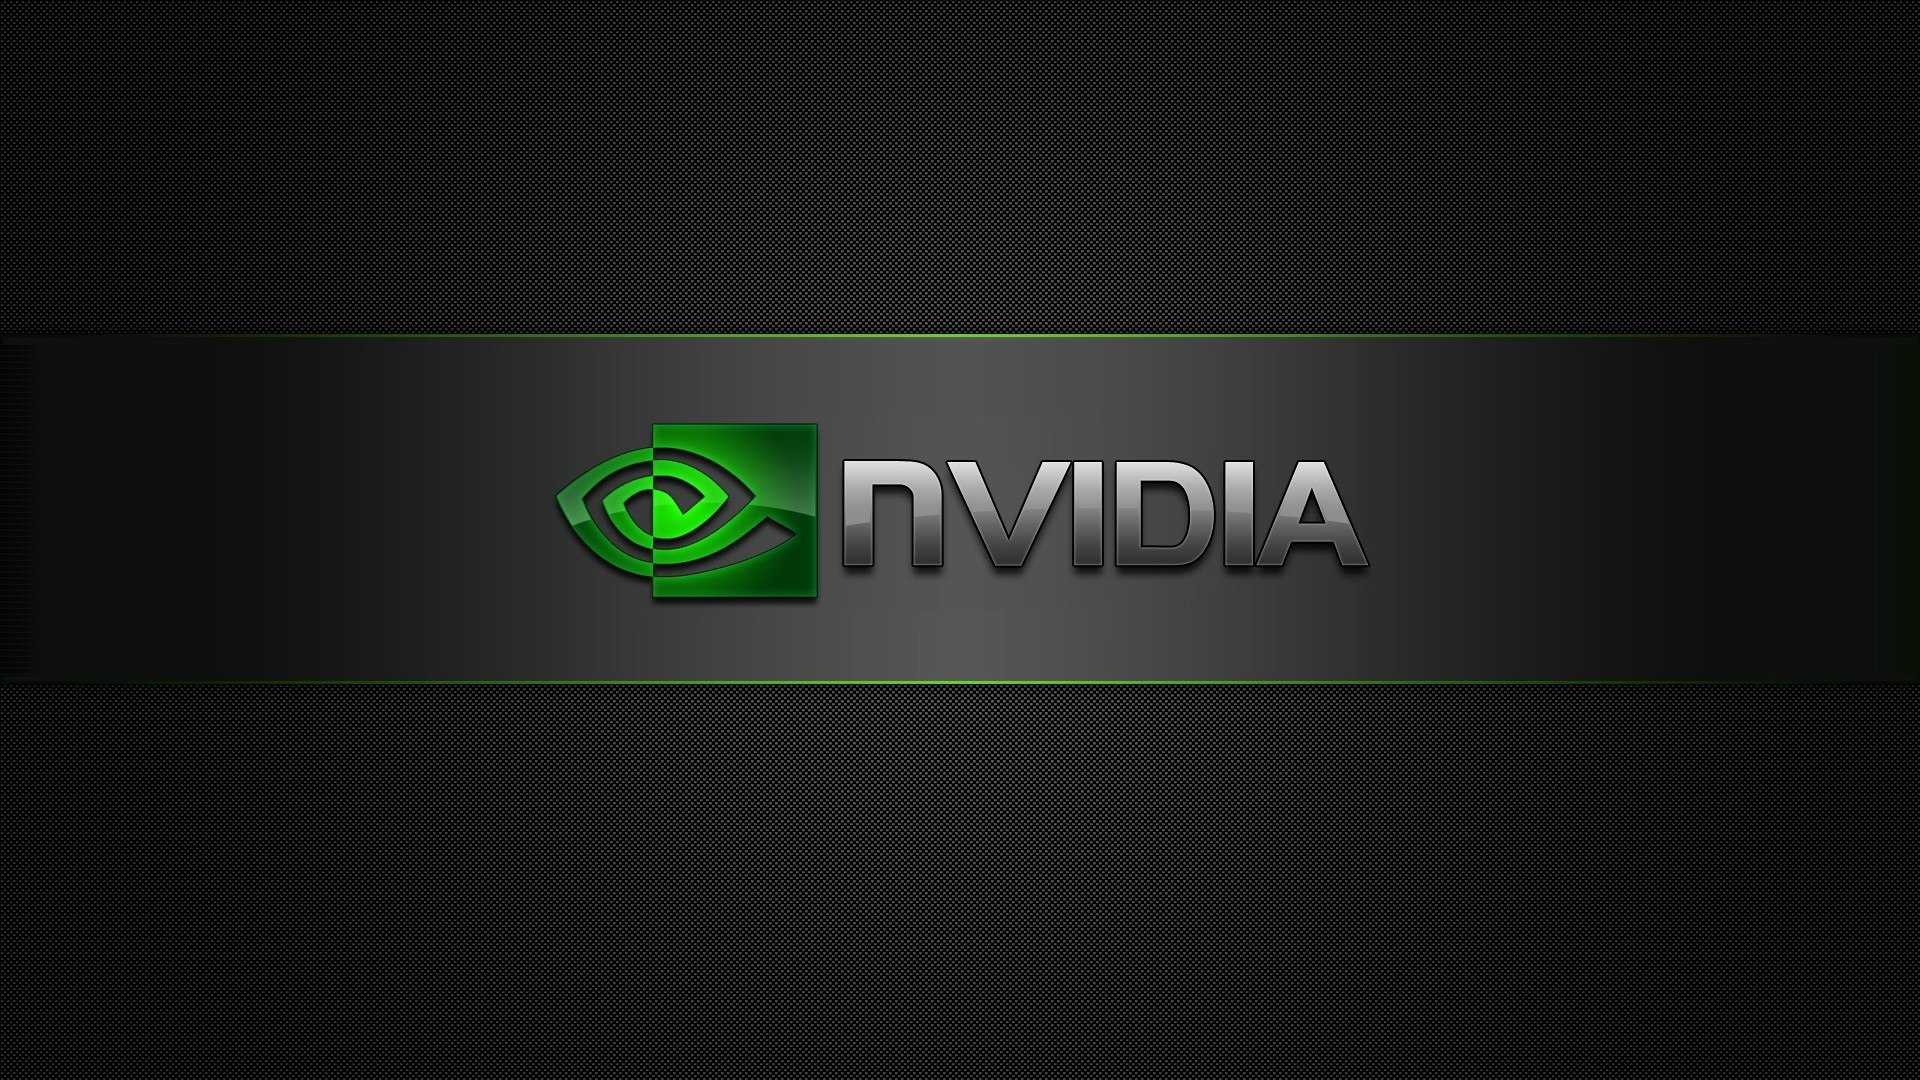 Nvidia Brand Logo Hd Logo 4k Wallpapers Images Backgrounds Photos And Pictures